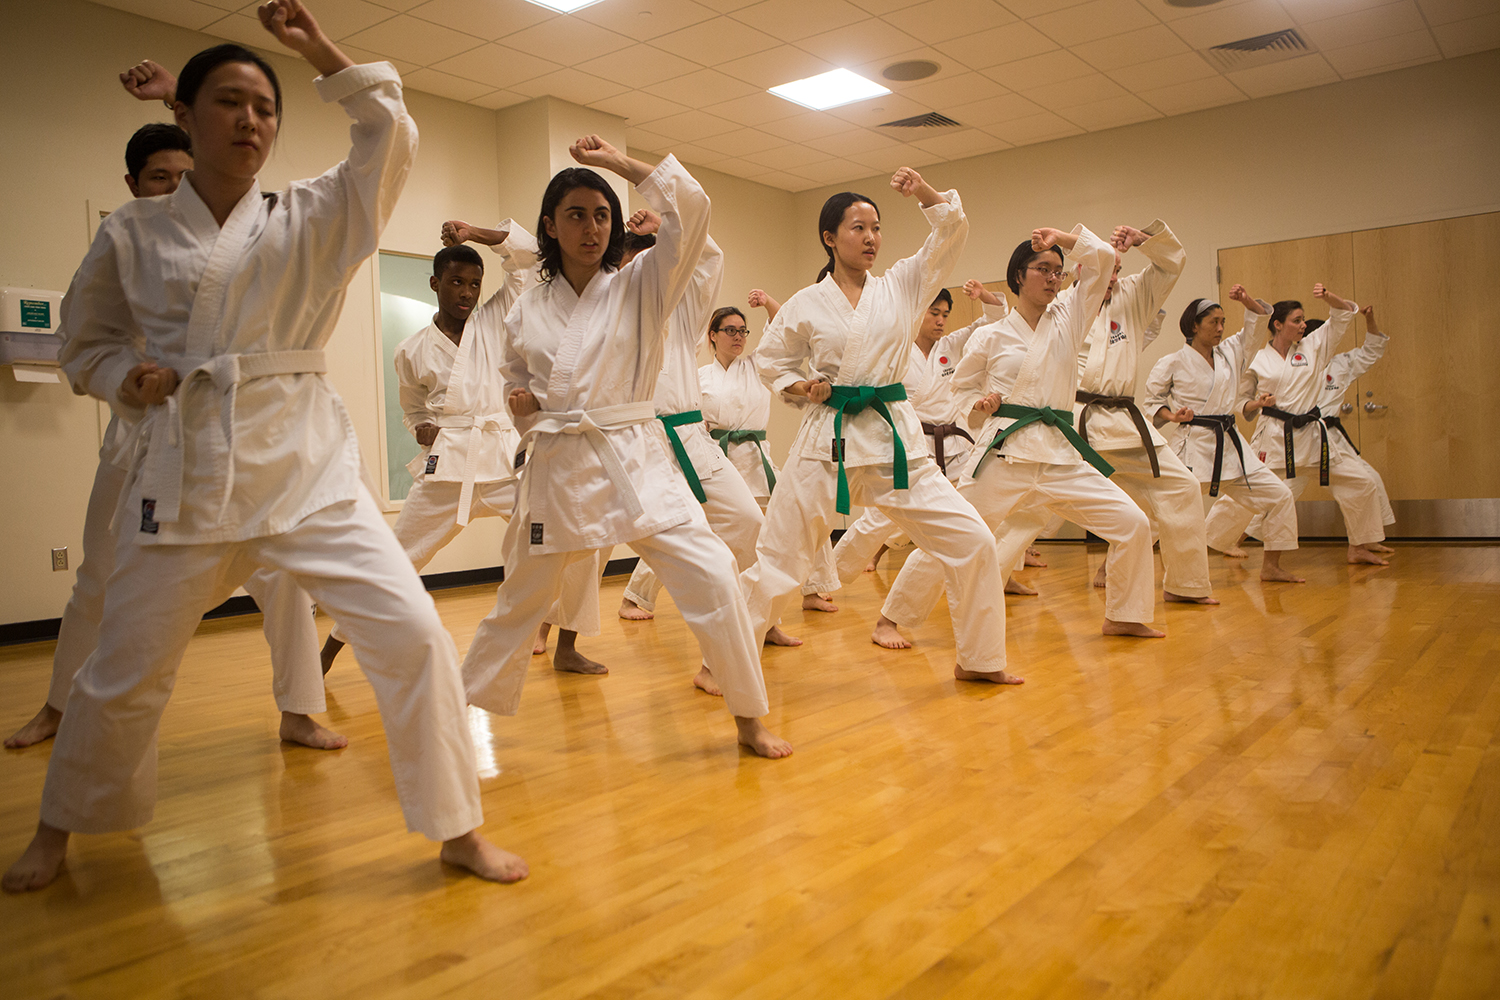 Karate Is A Self-Defense Practice Rather Than A Sport